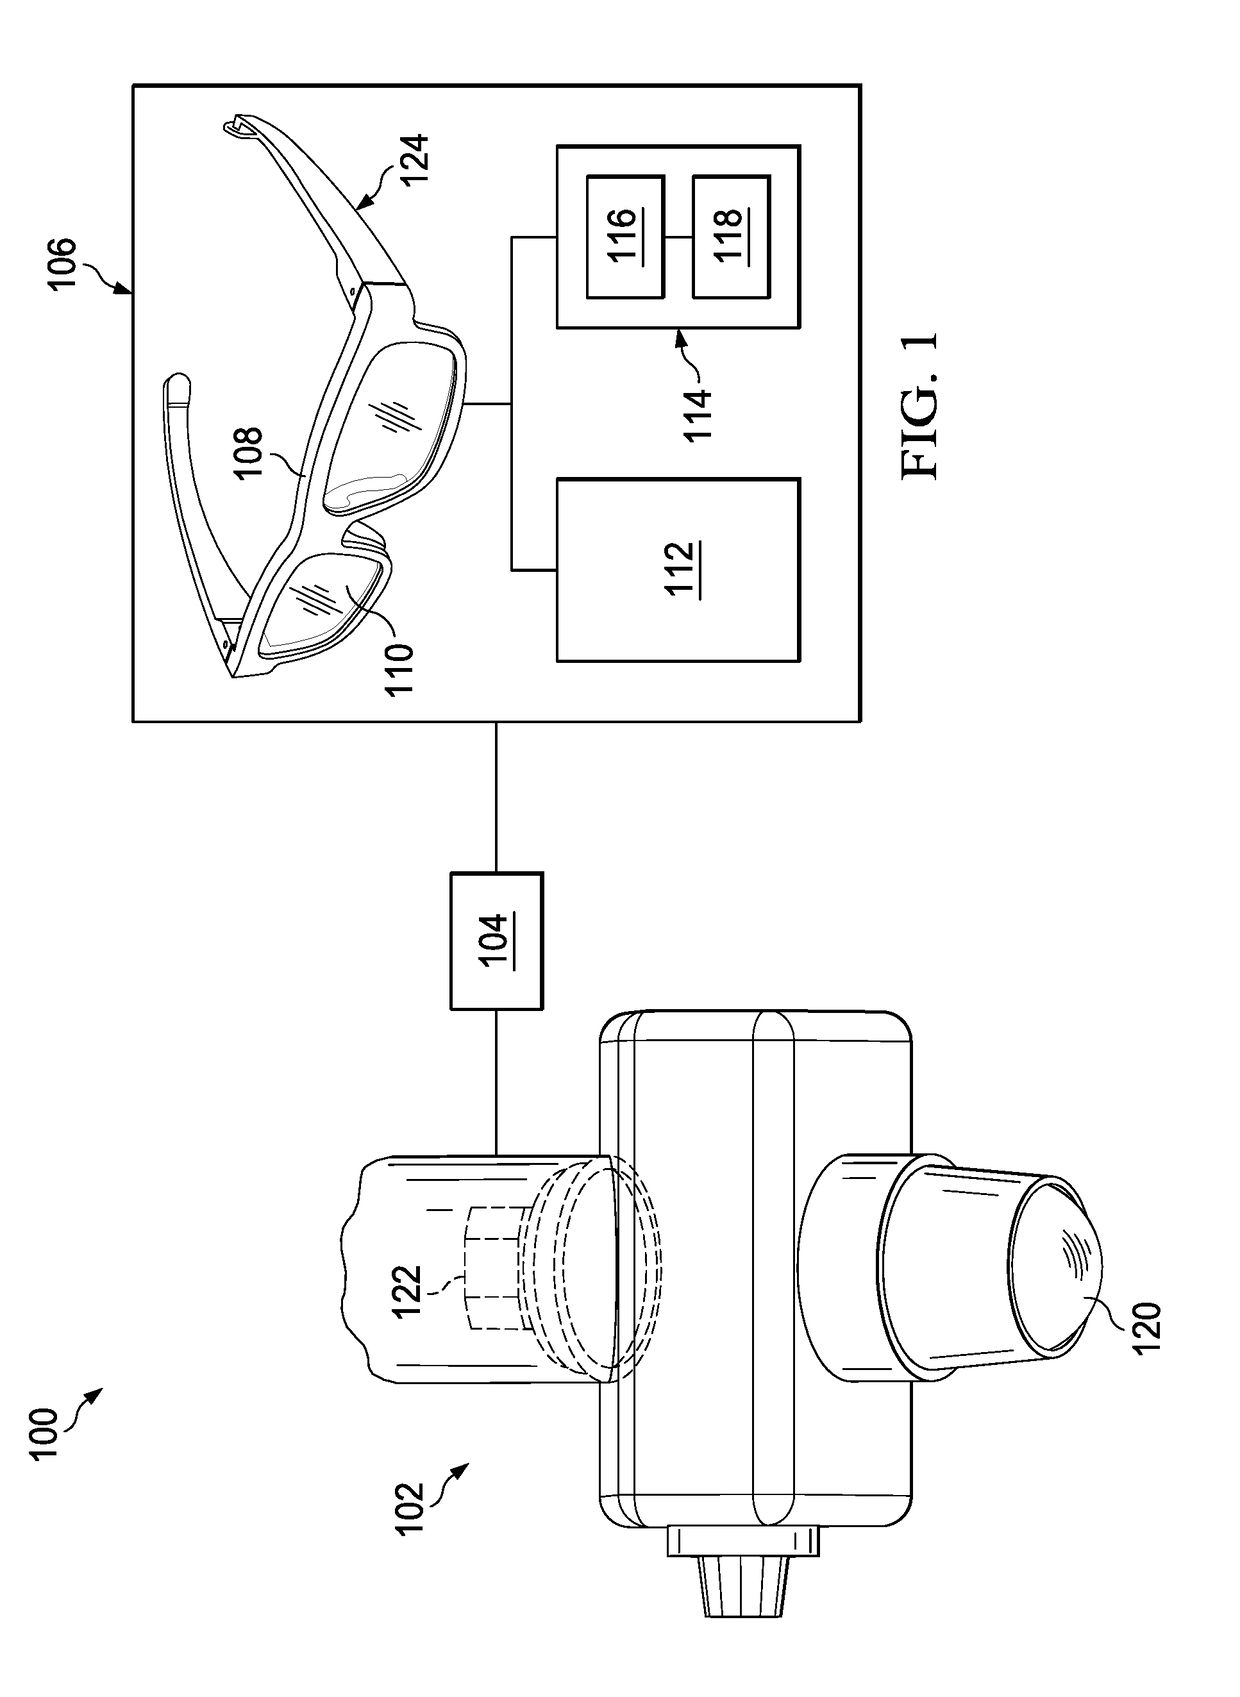 Systems and method for augmented reality ophthalmic surgical microscope projection